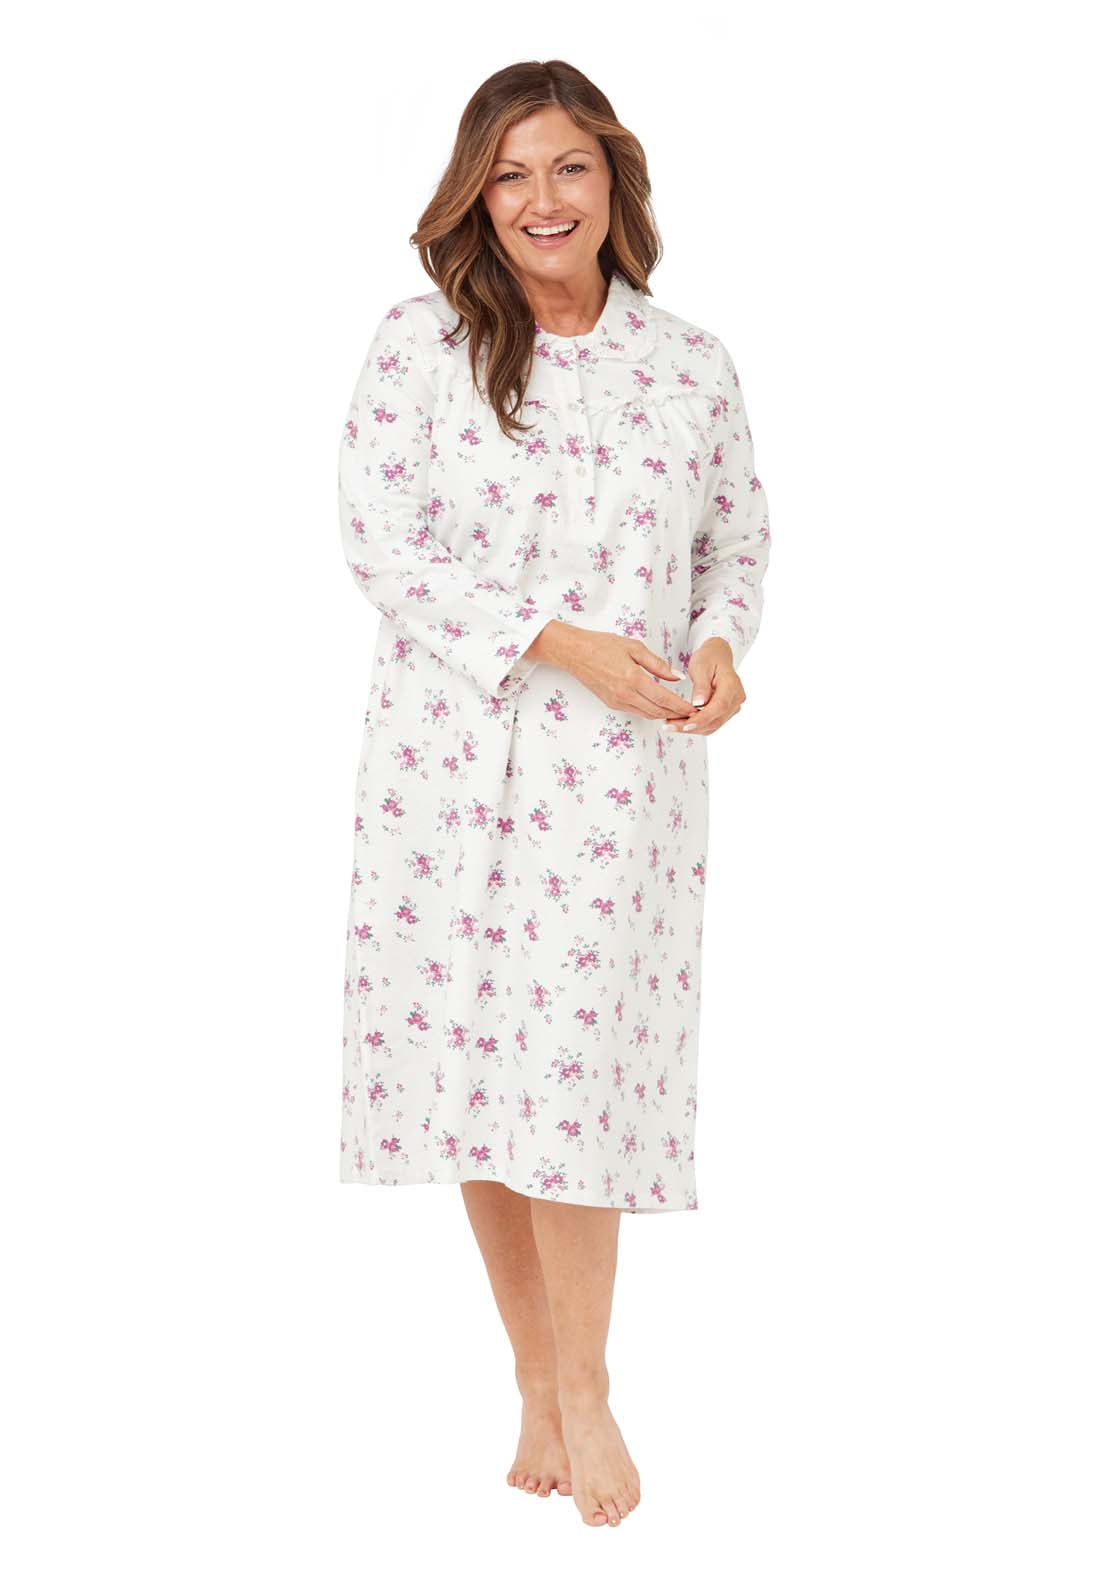 Marlon Polly Floral Wincey Night Dress - Pink 1 Shaws Department Stores